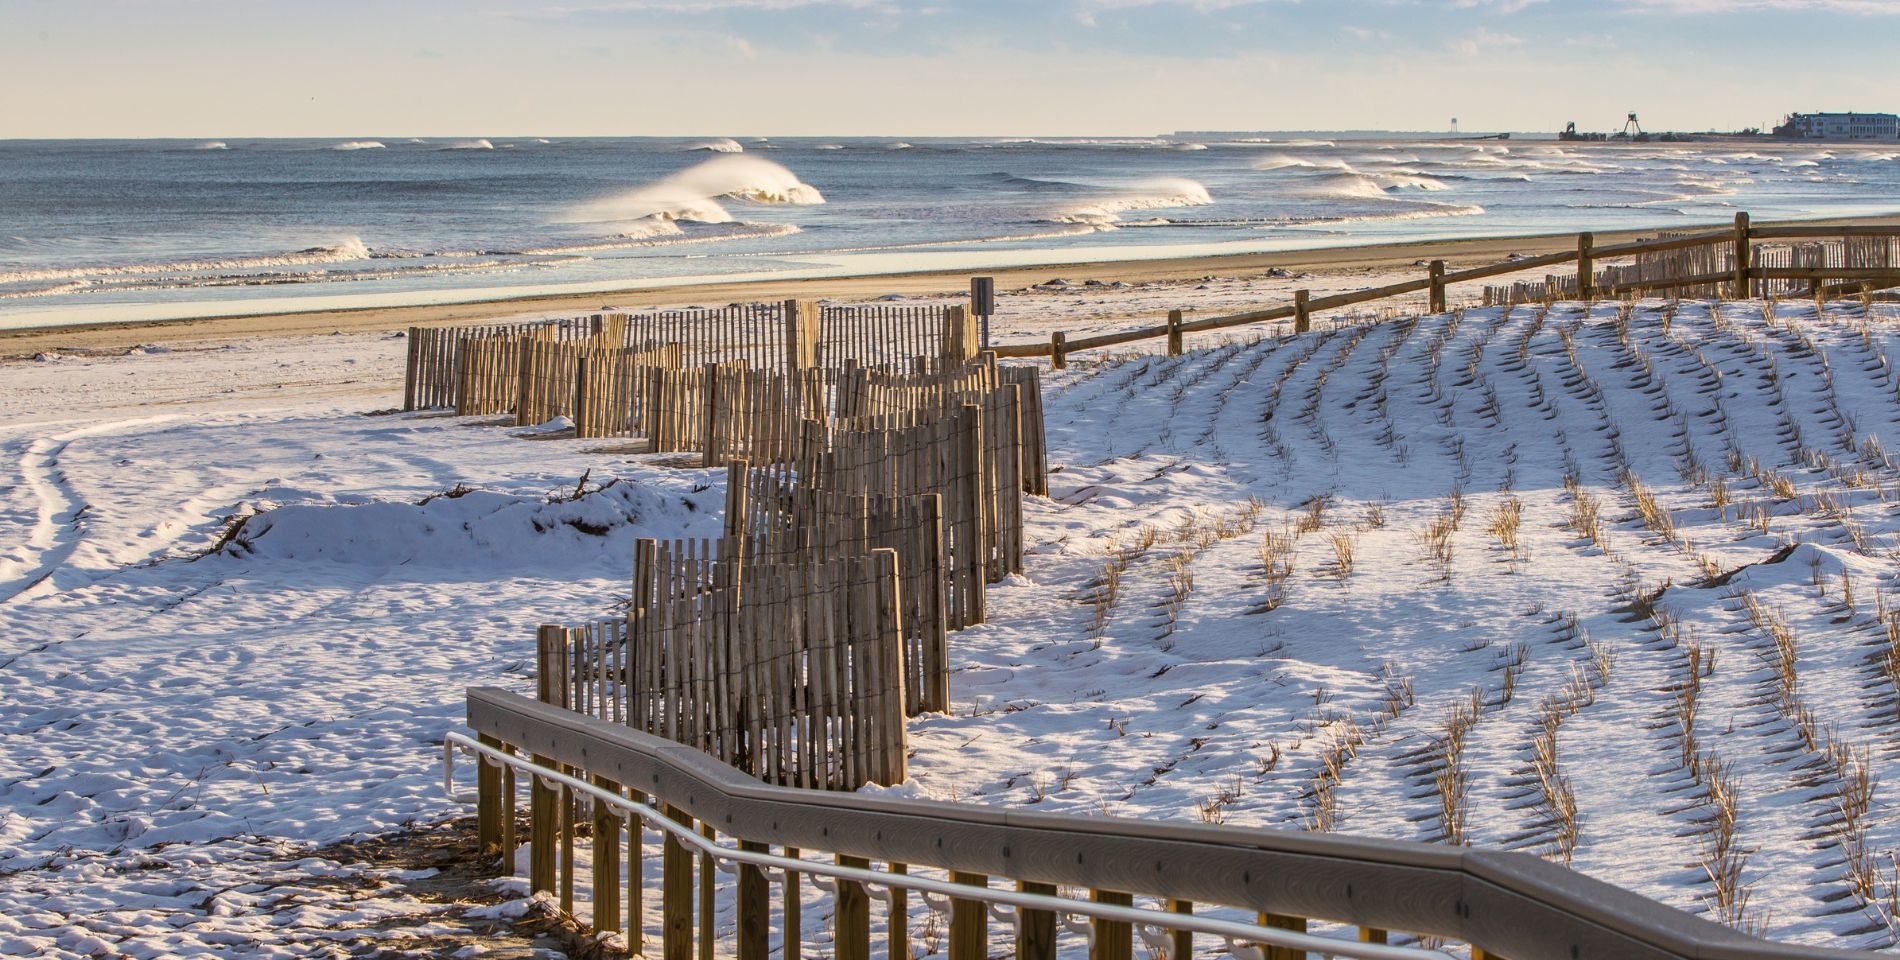 Waves rolling in on the beach with the sand covered in snow and lined with snow fences